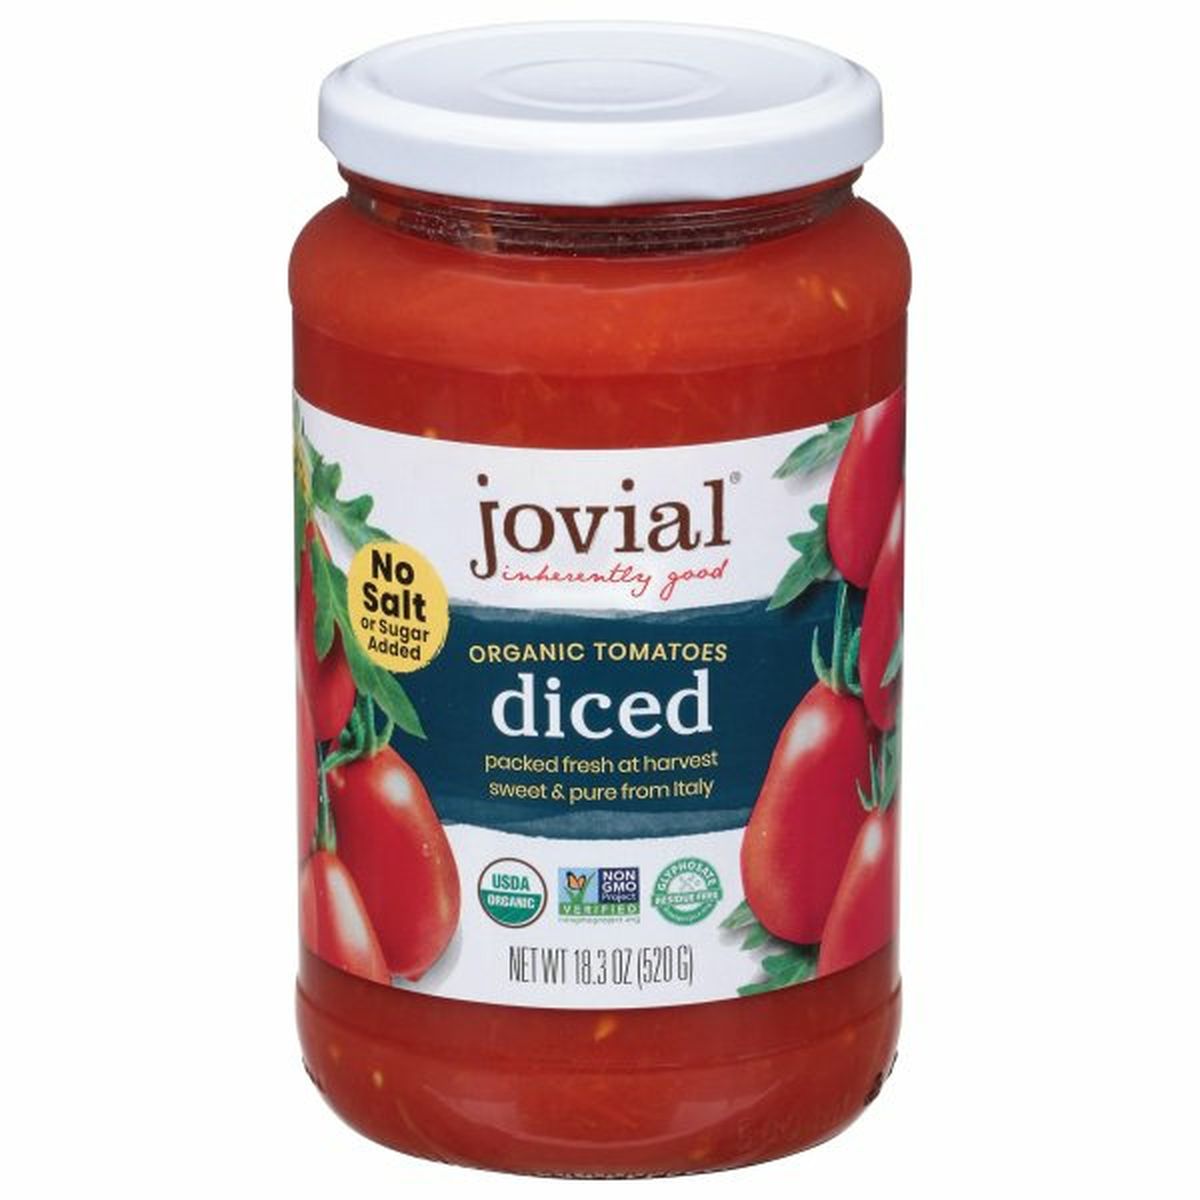 Calories in Jovial Tomatoes, Organic, Diced